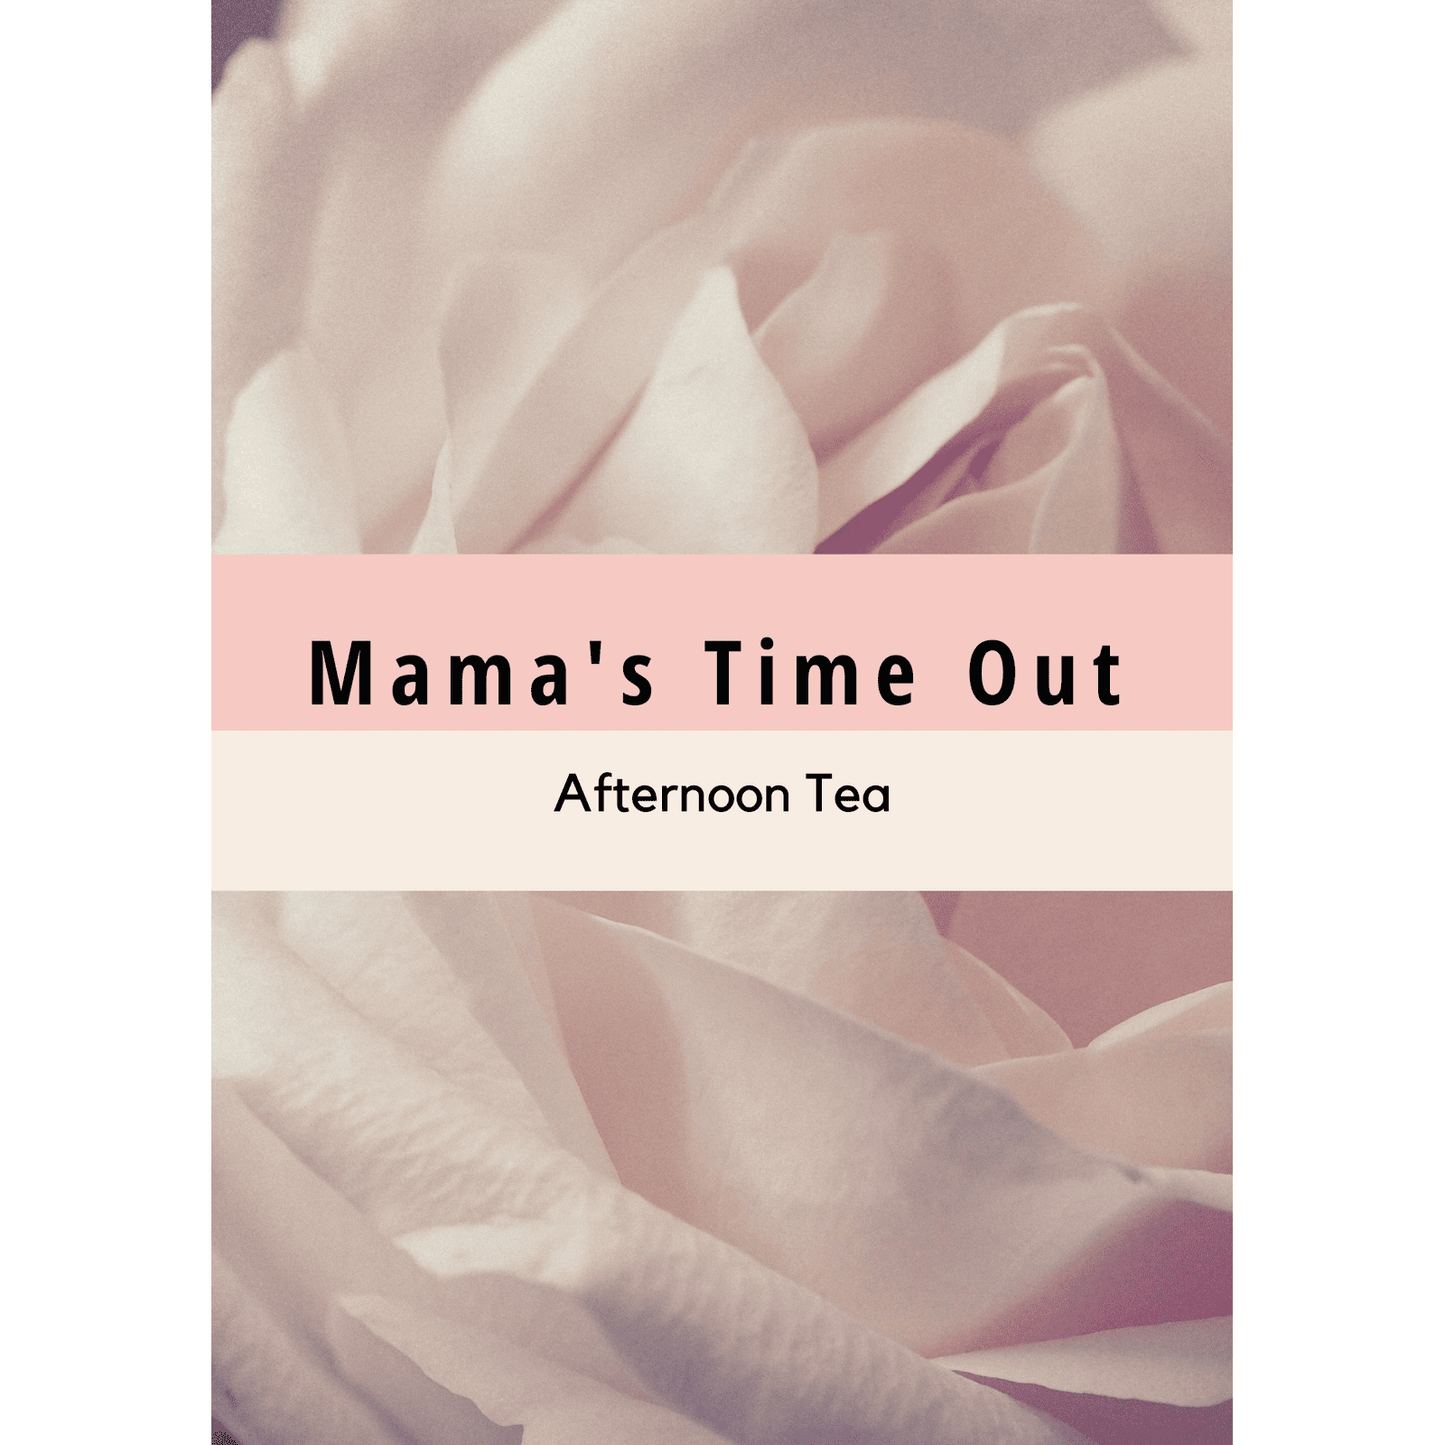 Mama's Time Out - Launch EVENT